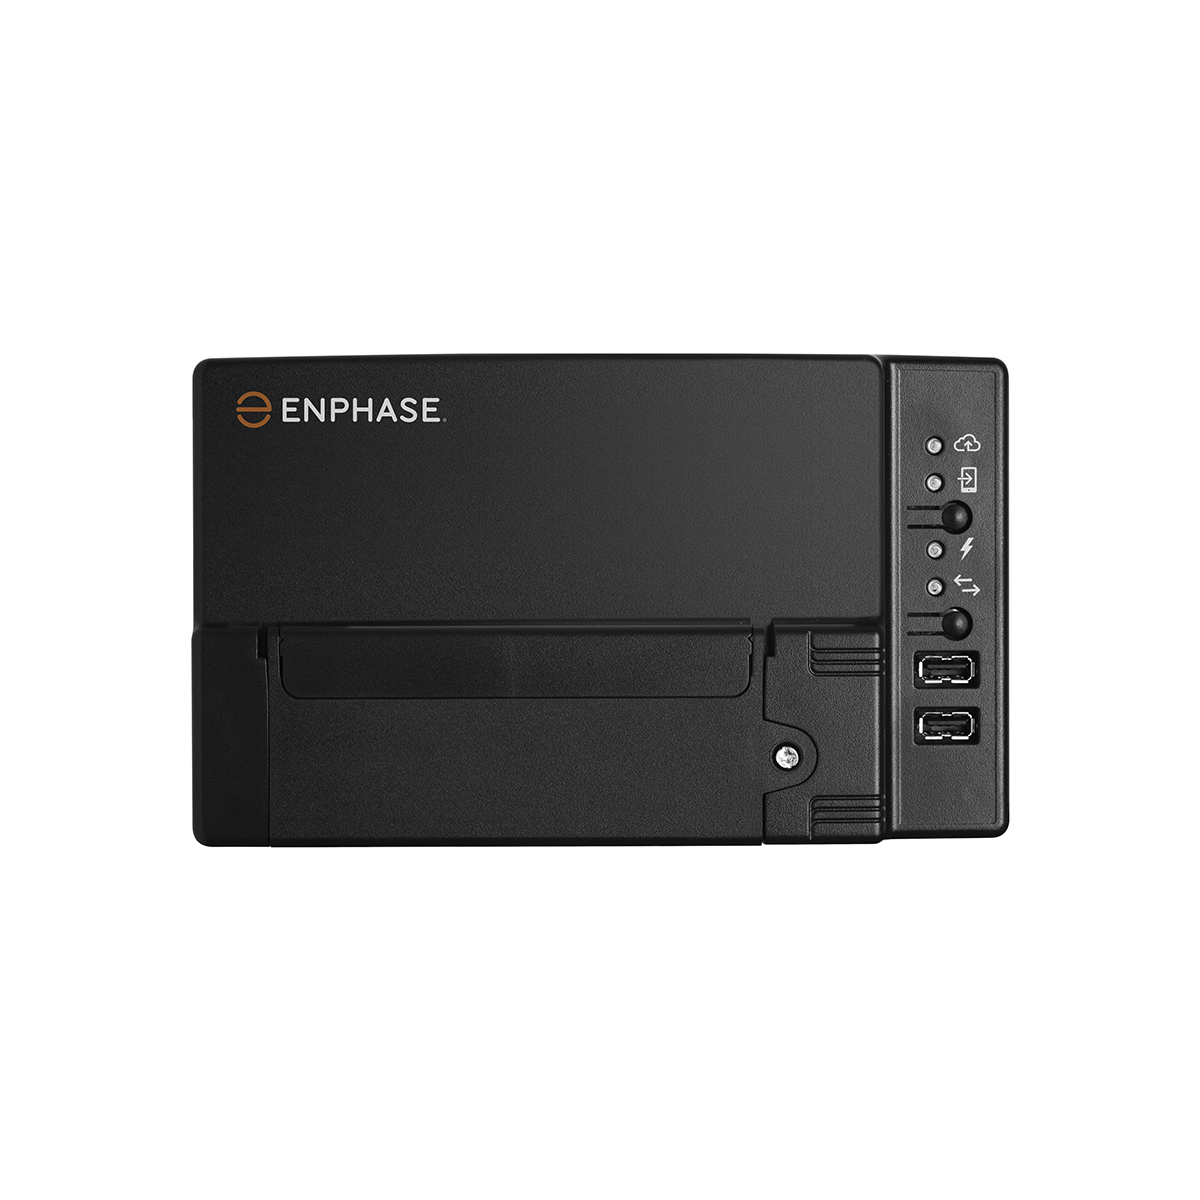 31x Sunpower P6 12555 wp met Enphase IQ8A en Accu 1x N Charge 10T,1 x N Charge 3T